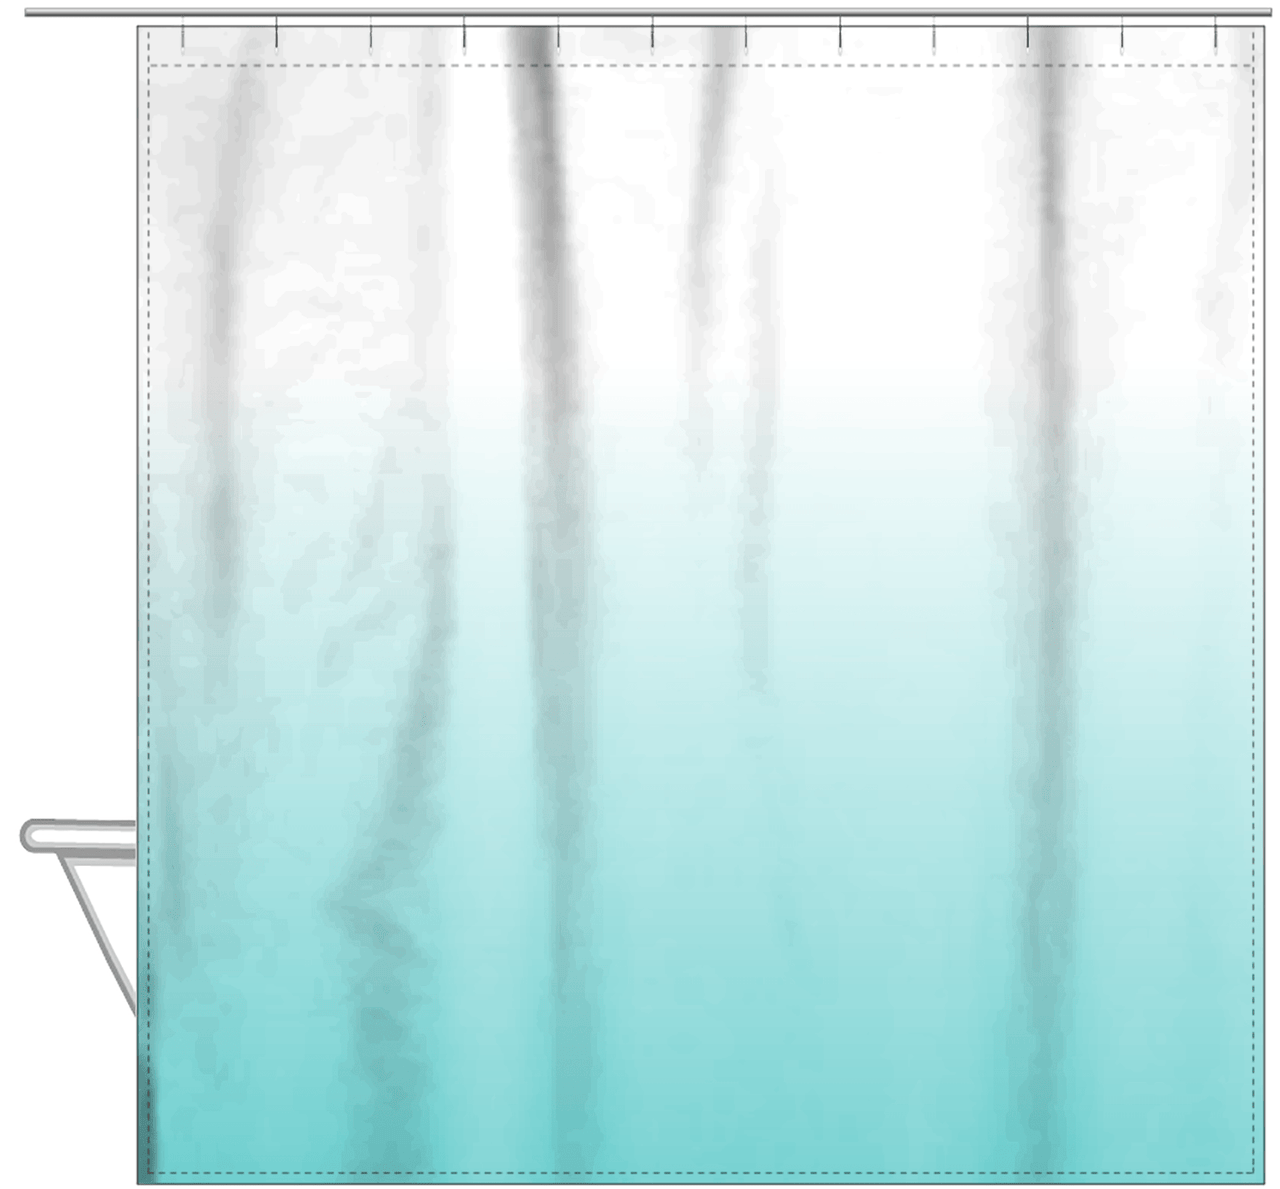 Personalized Ombre Shower Curtain - Teal and White - No Default Text - Ombre II - Hanging View